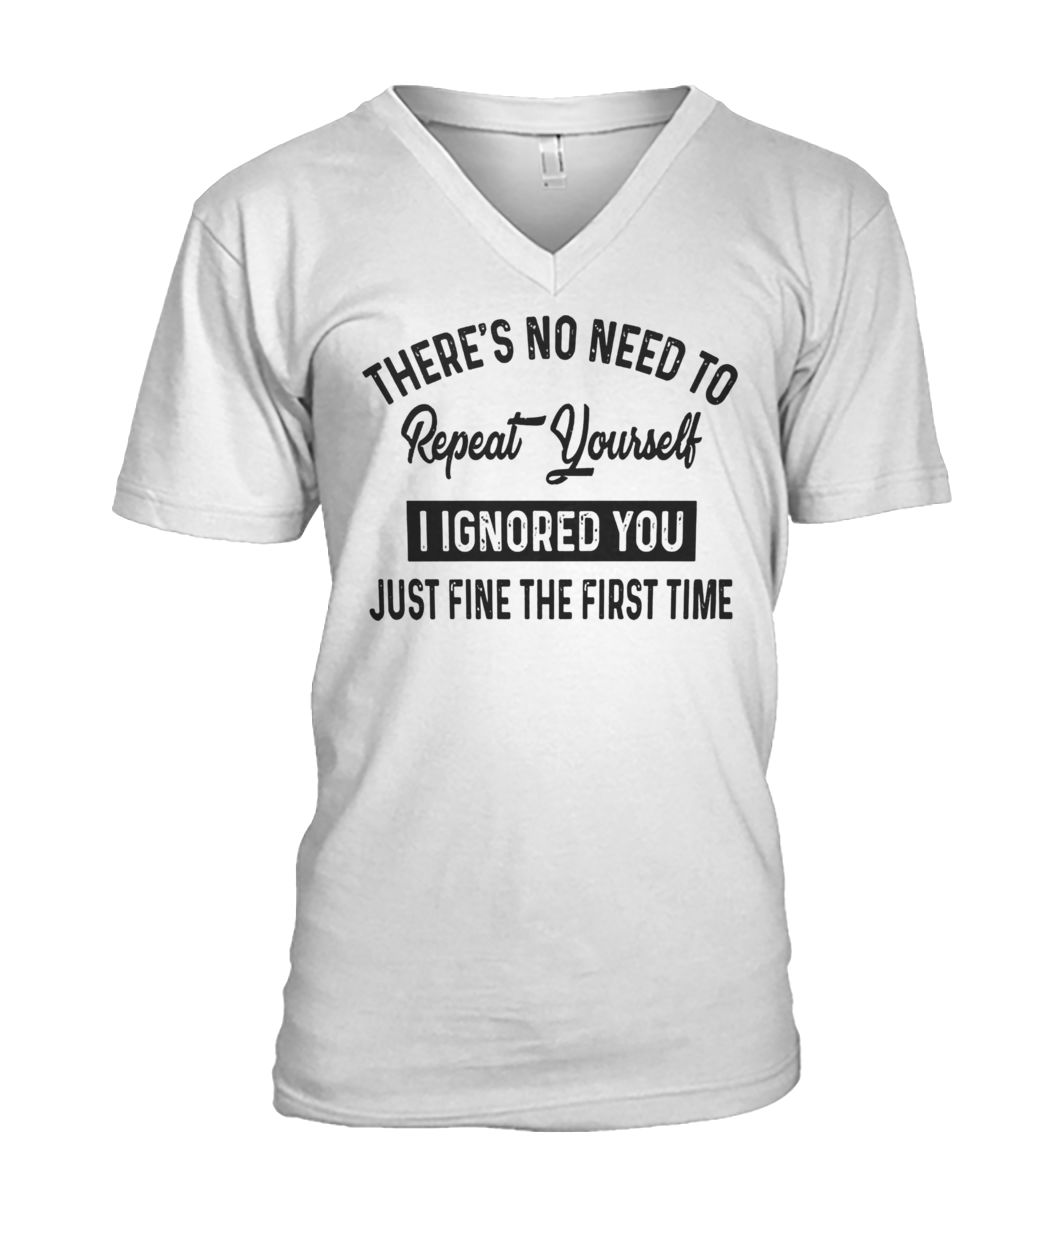 There’s no need to repeat yourself I ignored you just fine the first time mens v-neck